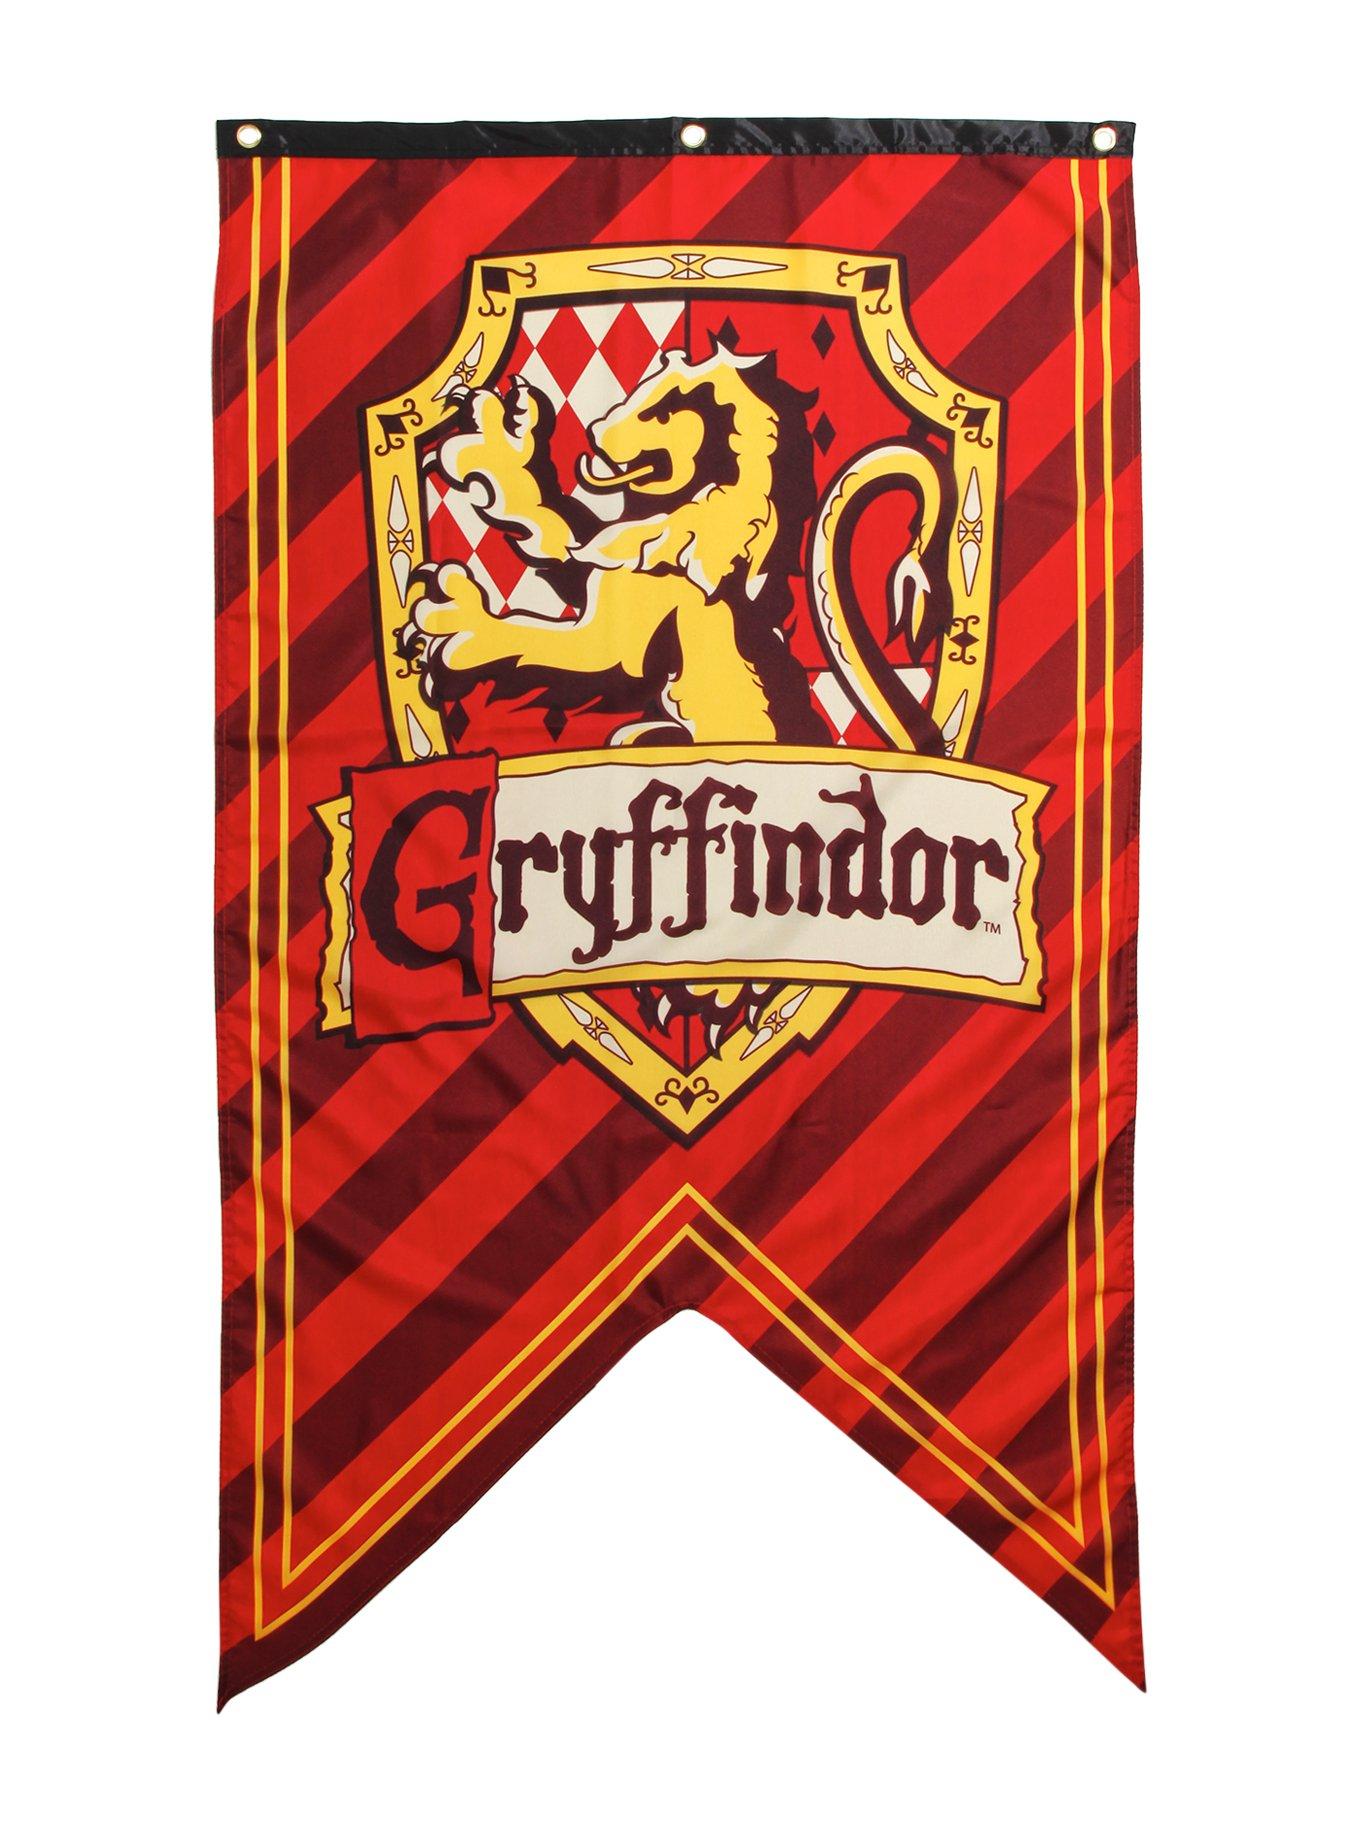 Harry Potter Gryffindor Shield Banner Hot Topic Exclusive, , hi-res